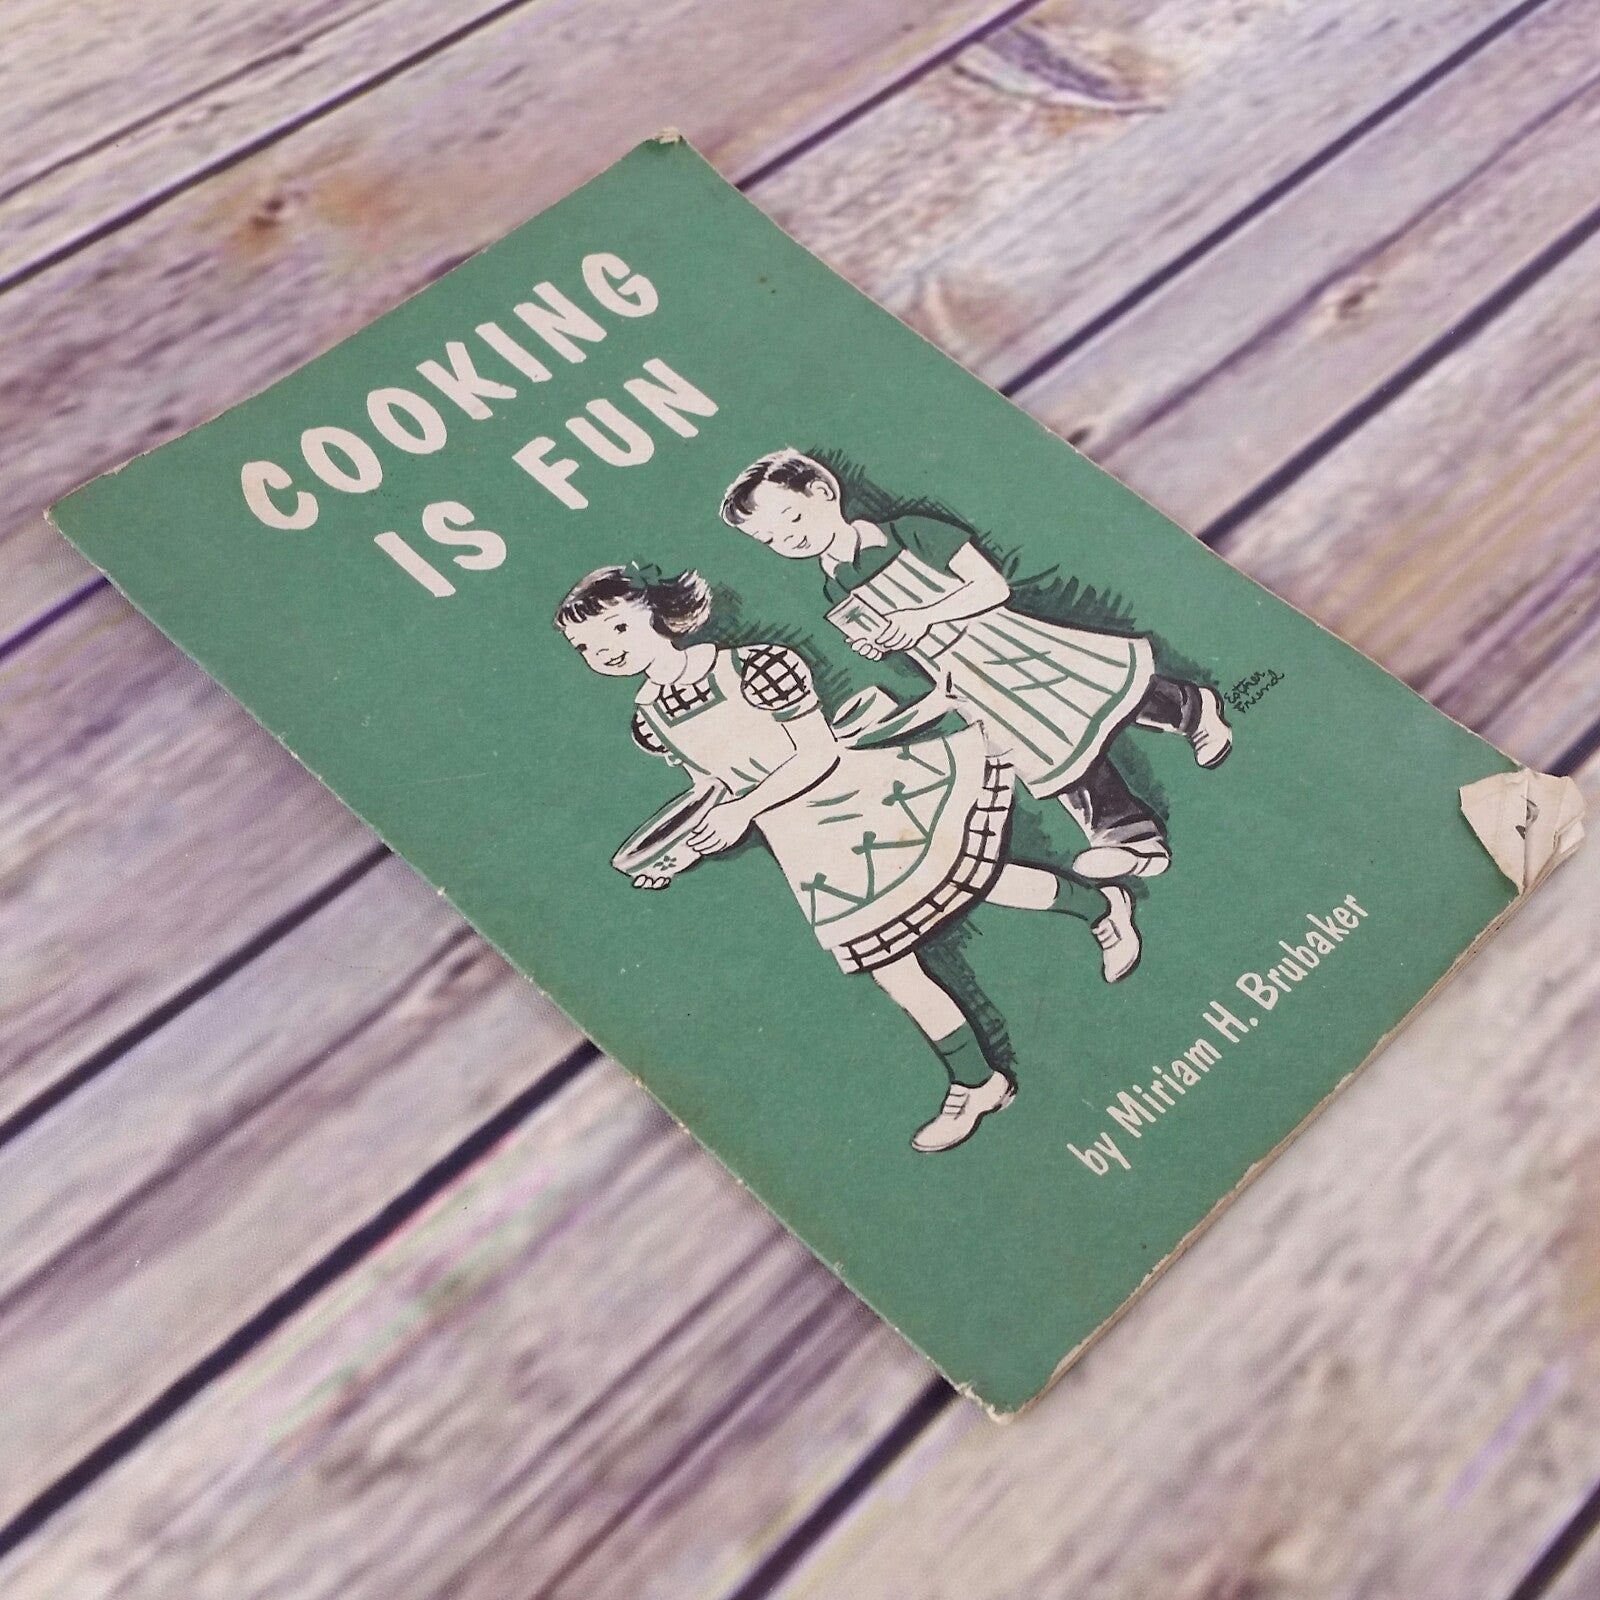 Vintage Kids Cookbook Kids Cooking Recipes Cooking is Fun 1961 National Dairy Council Miriam Brubaker Paperback Booklet - At Grandma's Table